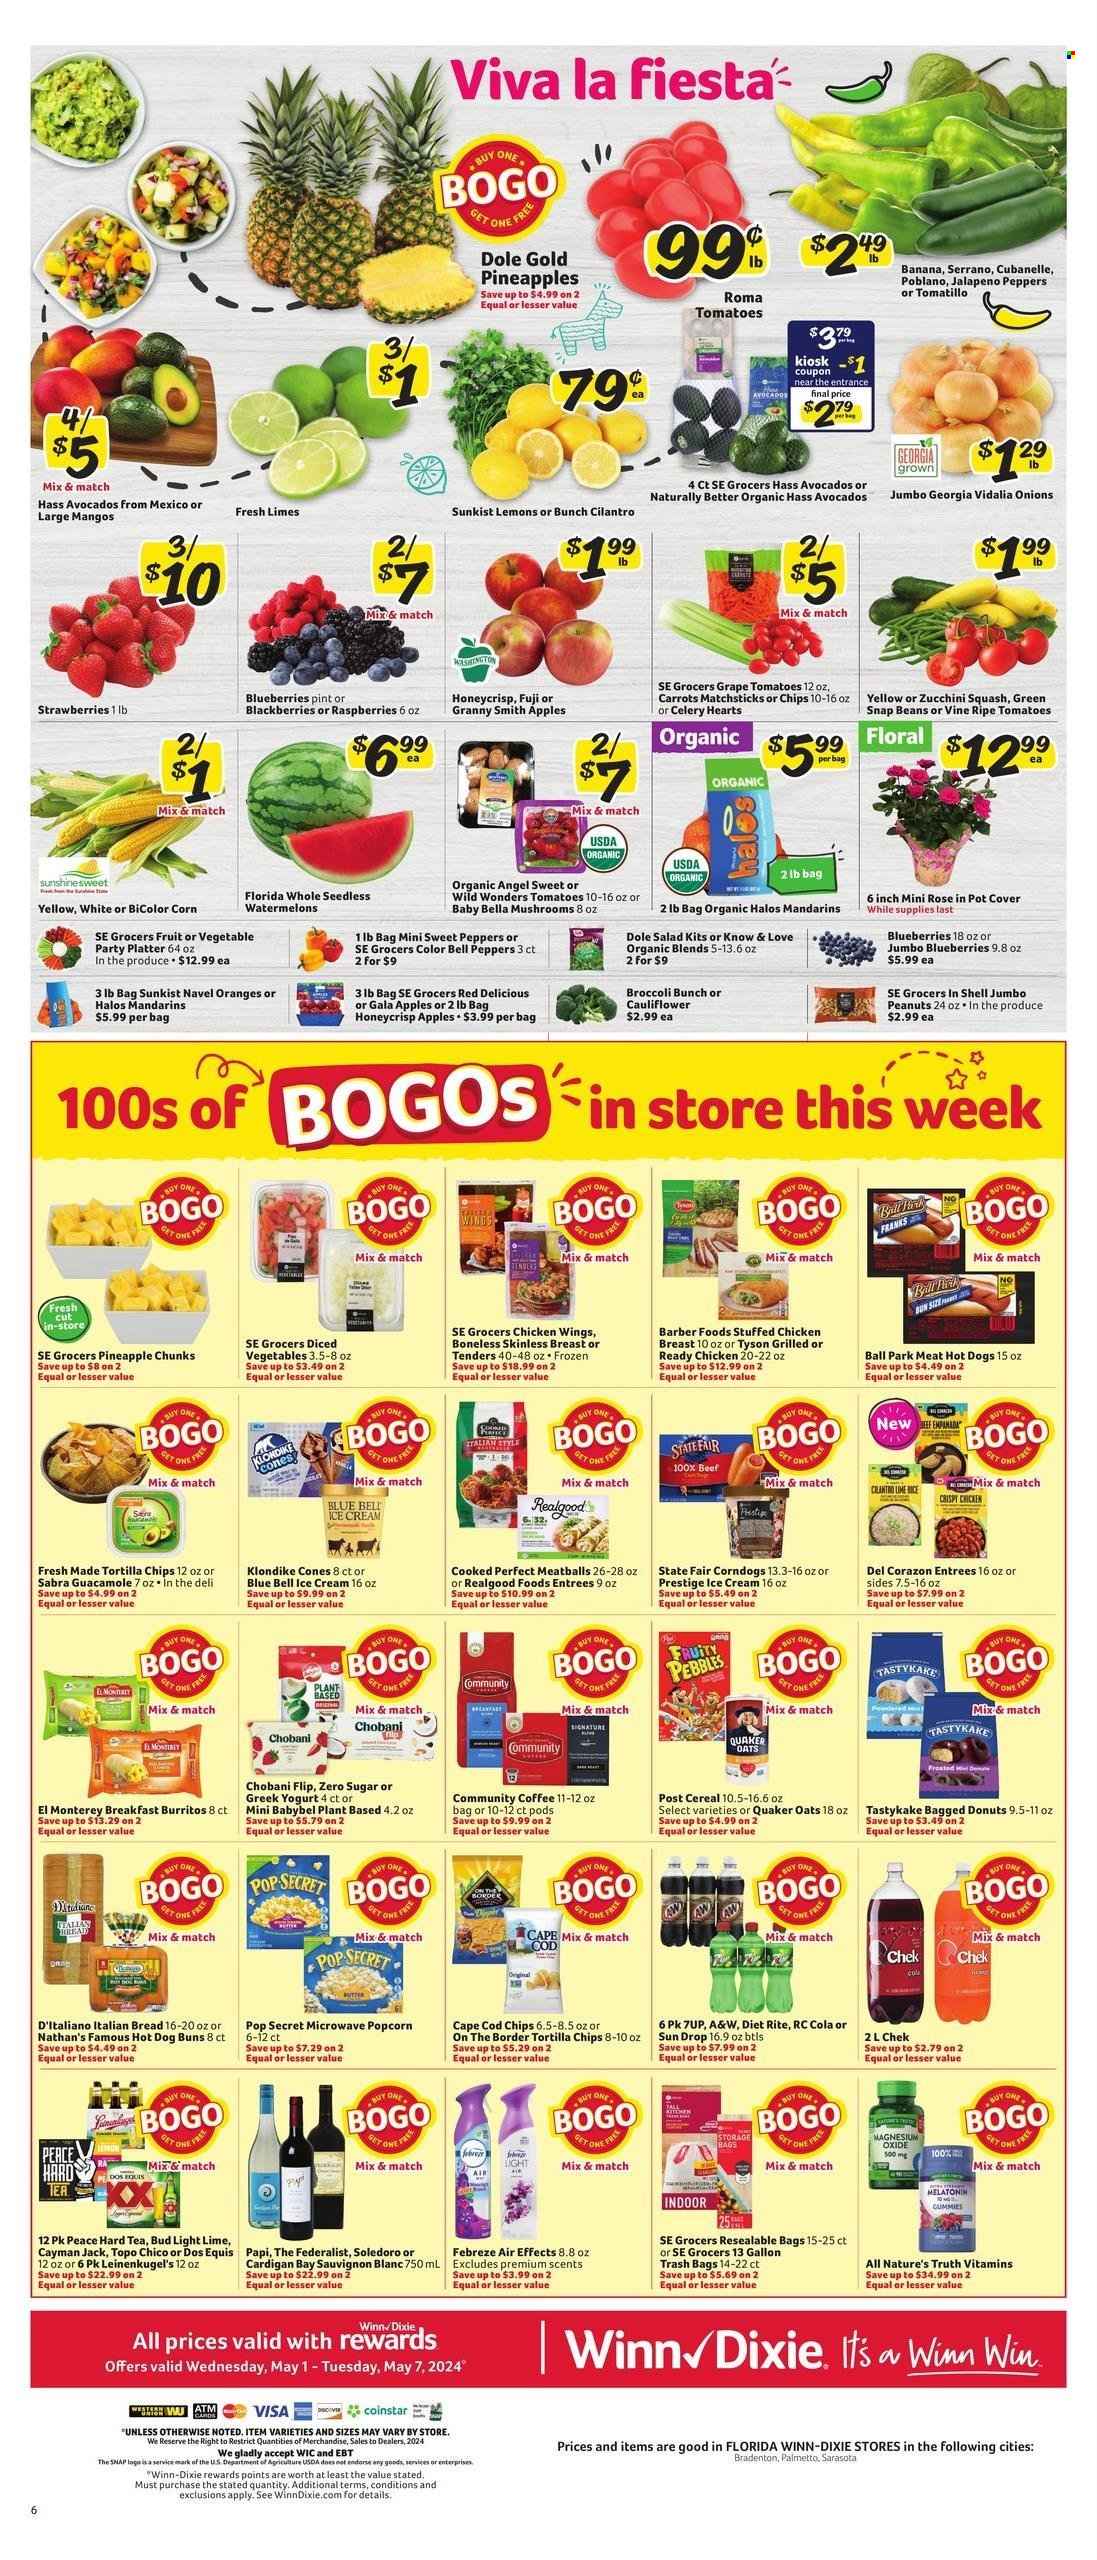 thumbnail - Winn Dixie Flyer - 05/01/2024 - 05/07/2024 - Sales products - popcorn, peanuts, salad greens, salad, Dole, blueberries, blackberries, raspberries, apples, Granny Smith, mushrooms, baby bella mushrooms, tomatoes, Gala, Red Delicious apples, broccoli, cauliflower, burrito, ready meal, tortilla chips, chips, white wine, wine, alcohol, Sauvignon Blanc, pineapple, lemons, cilantro, Nature's Truth, dietary supplement, vitamins, onion, watermelon, avocado, mango, mandarines, oranges, navel oranges, diced fruit, diced vegetables, limes, Quaker, oats, cereals, guacamole, frankfurters, chicken wings, tea, Hard Seltzer, beer, Bud Light, Topo Chico, Leinenkugel's, Dos Equis, cheese, Babybel, greek yoghurt, yoghurt, Chobani, soft drink, 7UP, carbonated soft drink, bag, storage bag, Febreze, air freshener, tomatillo, jalapeño, meatballs, ice cream, bell peppers, sweet peppers, peppers, strawberries, Blue Bell, ice cones, coffee, bread, hot dog rolls, buns, carrots, sleeved celery, sliced vegetables, beans, zucchini, donut, stuffed chicken, party tray, mixed vegetables. Page 10.